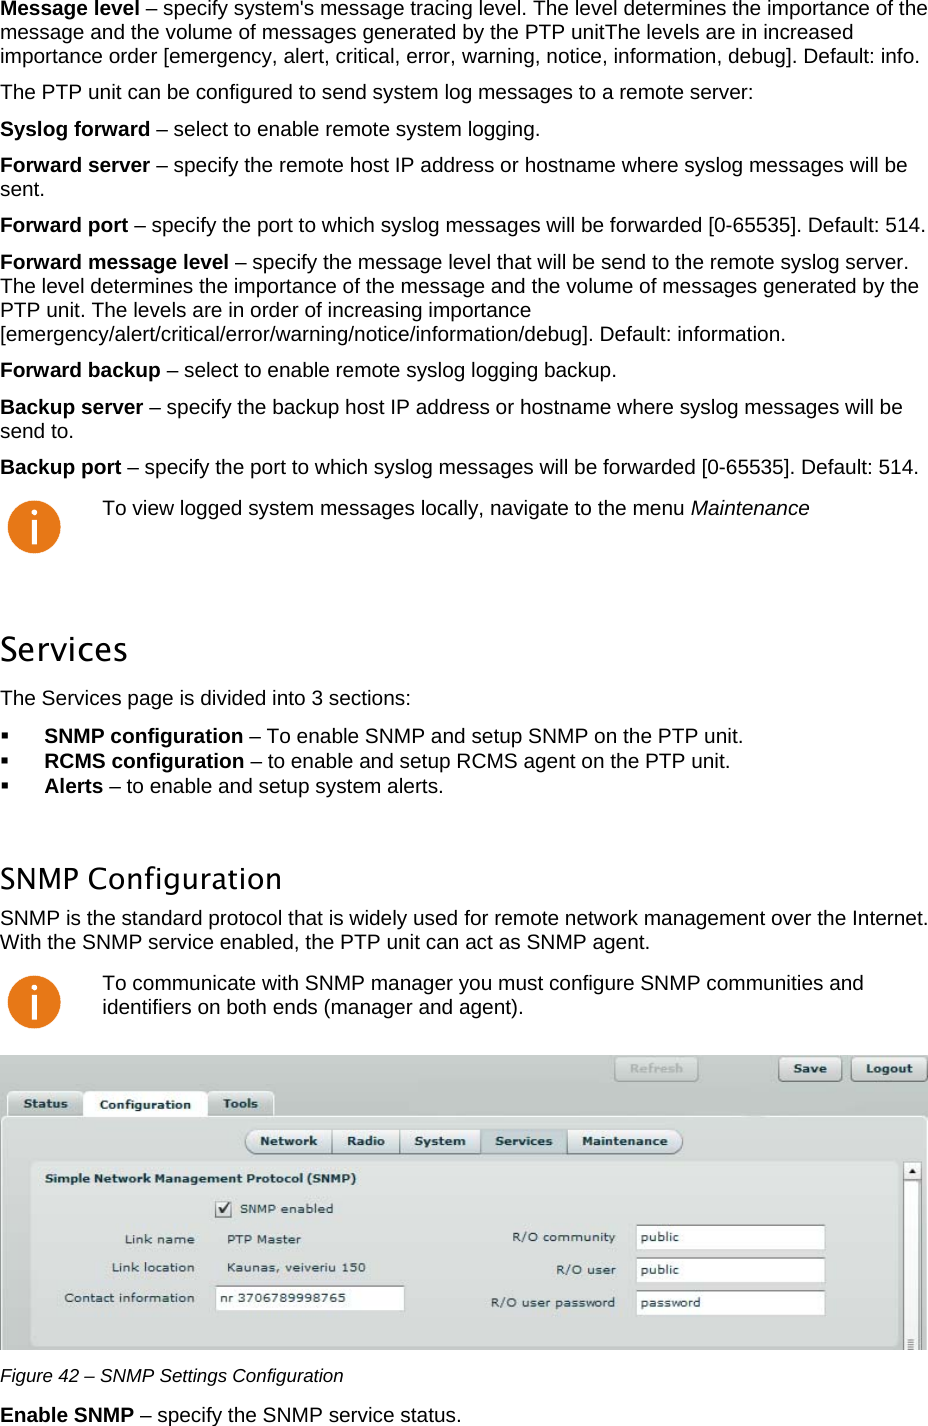  LigoWave Page 36 Message level – specify system&apos;s message tracing level. The level determines the importance of the message and the volume of messages generated by the PTP unitThe levels are in increased importance order [emergency, alert, critical, error, warning, notice, information, debug]. Default: info.  The PTP unit can be configured to send system log messages to a remote server:  Syslog forward – select to enable remote system logging.  Forward server – specify the remote host IP address or hostname where syslog messages will be sent.  Forward port – specify the port to which syslog messages will be forwarded [0-65535]. Default: 514.  Forward message level – specify the message level that will be send to the remote syslog server. The level determines the importance of the message and the volume of messages generated by the PTP unit. The levels are in order of increasing importance [emergency/alert/critical/error/warning/notice/information/debug]. Default: information.  Forward backup – select to enable remote syslog logging backup.  Backup server – specify the backup host IP address or hostname where syslog messages will be send to.  Backup port – specify the port to which syslog messages will be forwarded [0-65535]. Default: 514.   To view logged system messages locally, navigate to the menu Maintenance  Services The Services page is divided into 3 sections:   SNMP configuration – To enable SNMP and setup SNMP on the PTP unit.   RCMS configuration – to enable and setup RCMS agent on the PTP unit.   Alerts – to enable and setup system alerts.   SNMP Configuration  SNMP is the standard protocol that is widely used for remote network management over the Internet. With the SNMP service enabled, the PTP unit can act as SNMP agent.   To communicate with SNMP manager you must configure SNMP communities and identifiers on both ends (manager and agent).  Figure 42 – SNMP Settings Configuration Enable SNMP – specify the SNMP service status.  